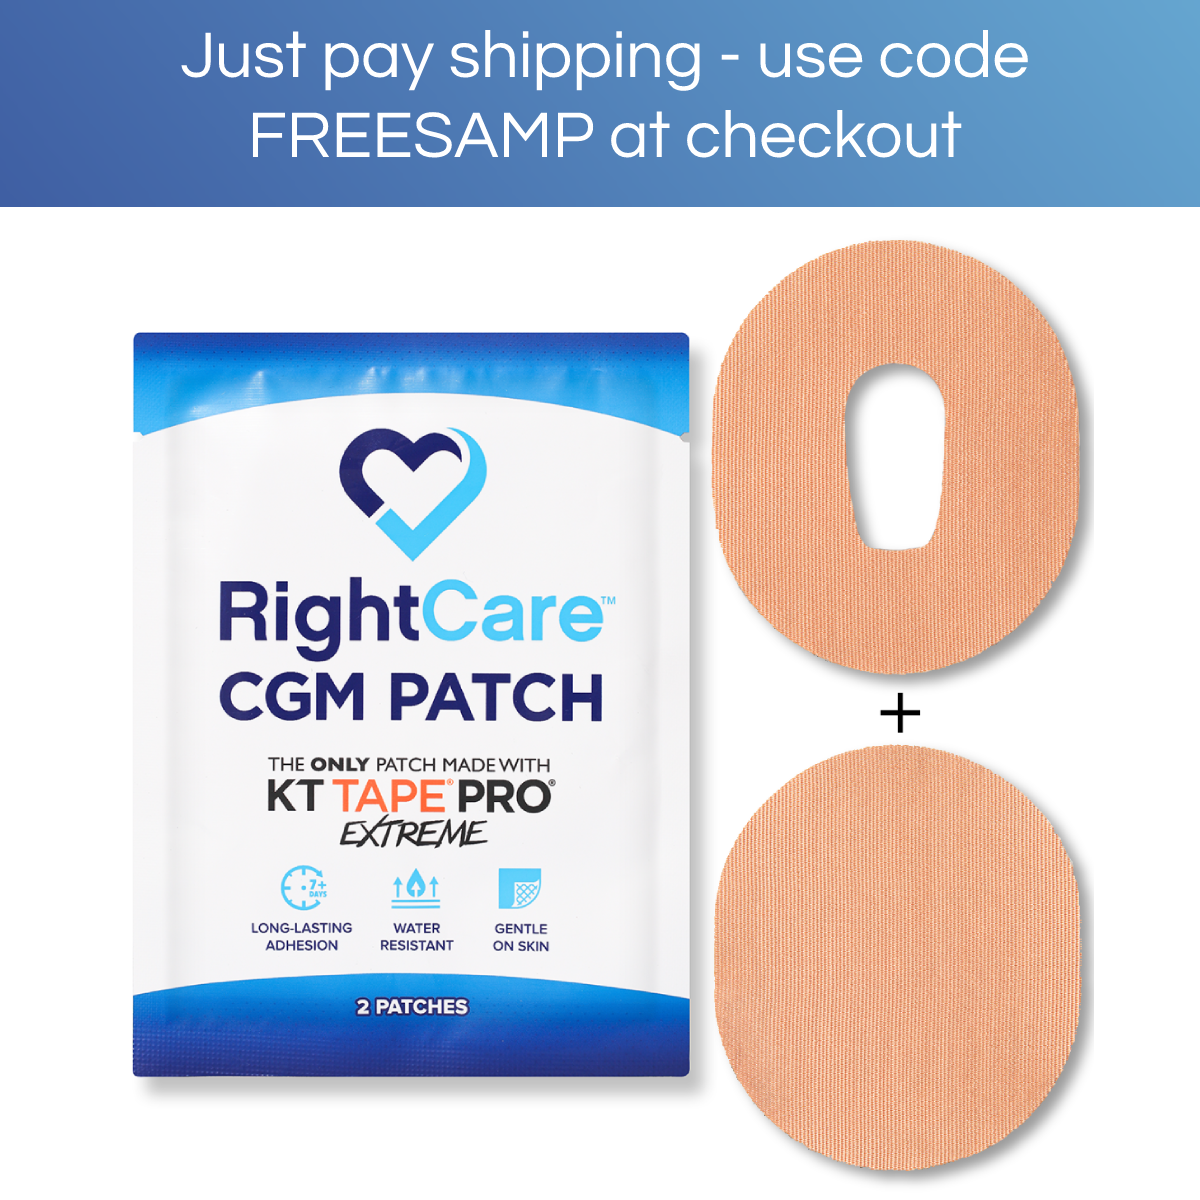 RightCare CGM Adhesive Patch for Dexcom G5/G6 Uncovered Oval, Tan , Made with Synthetic Pro Extreme KT Tape, Bag of 25, Beige